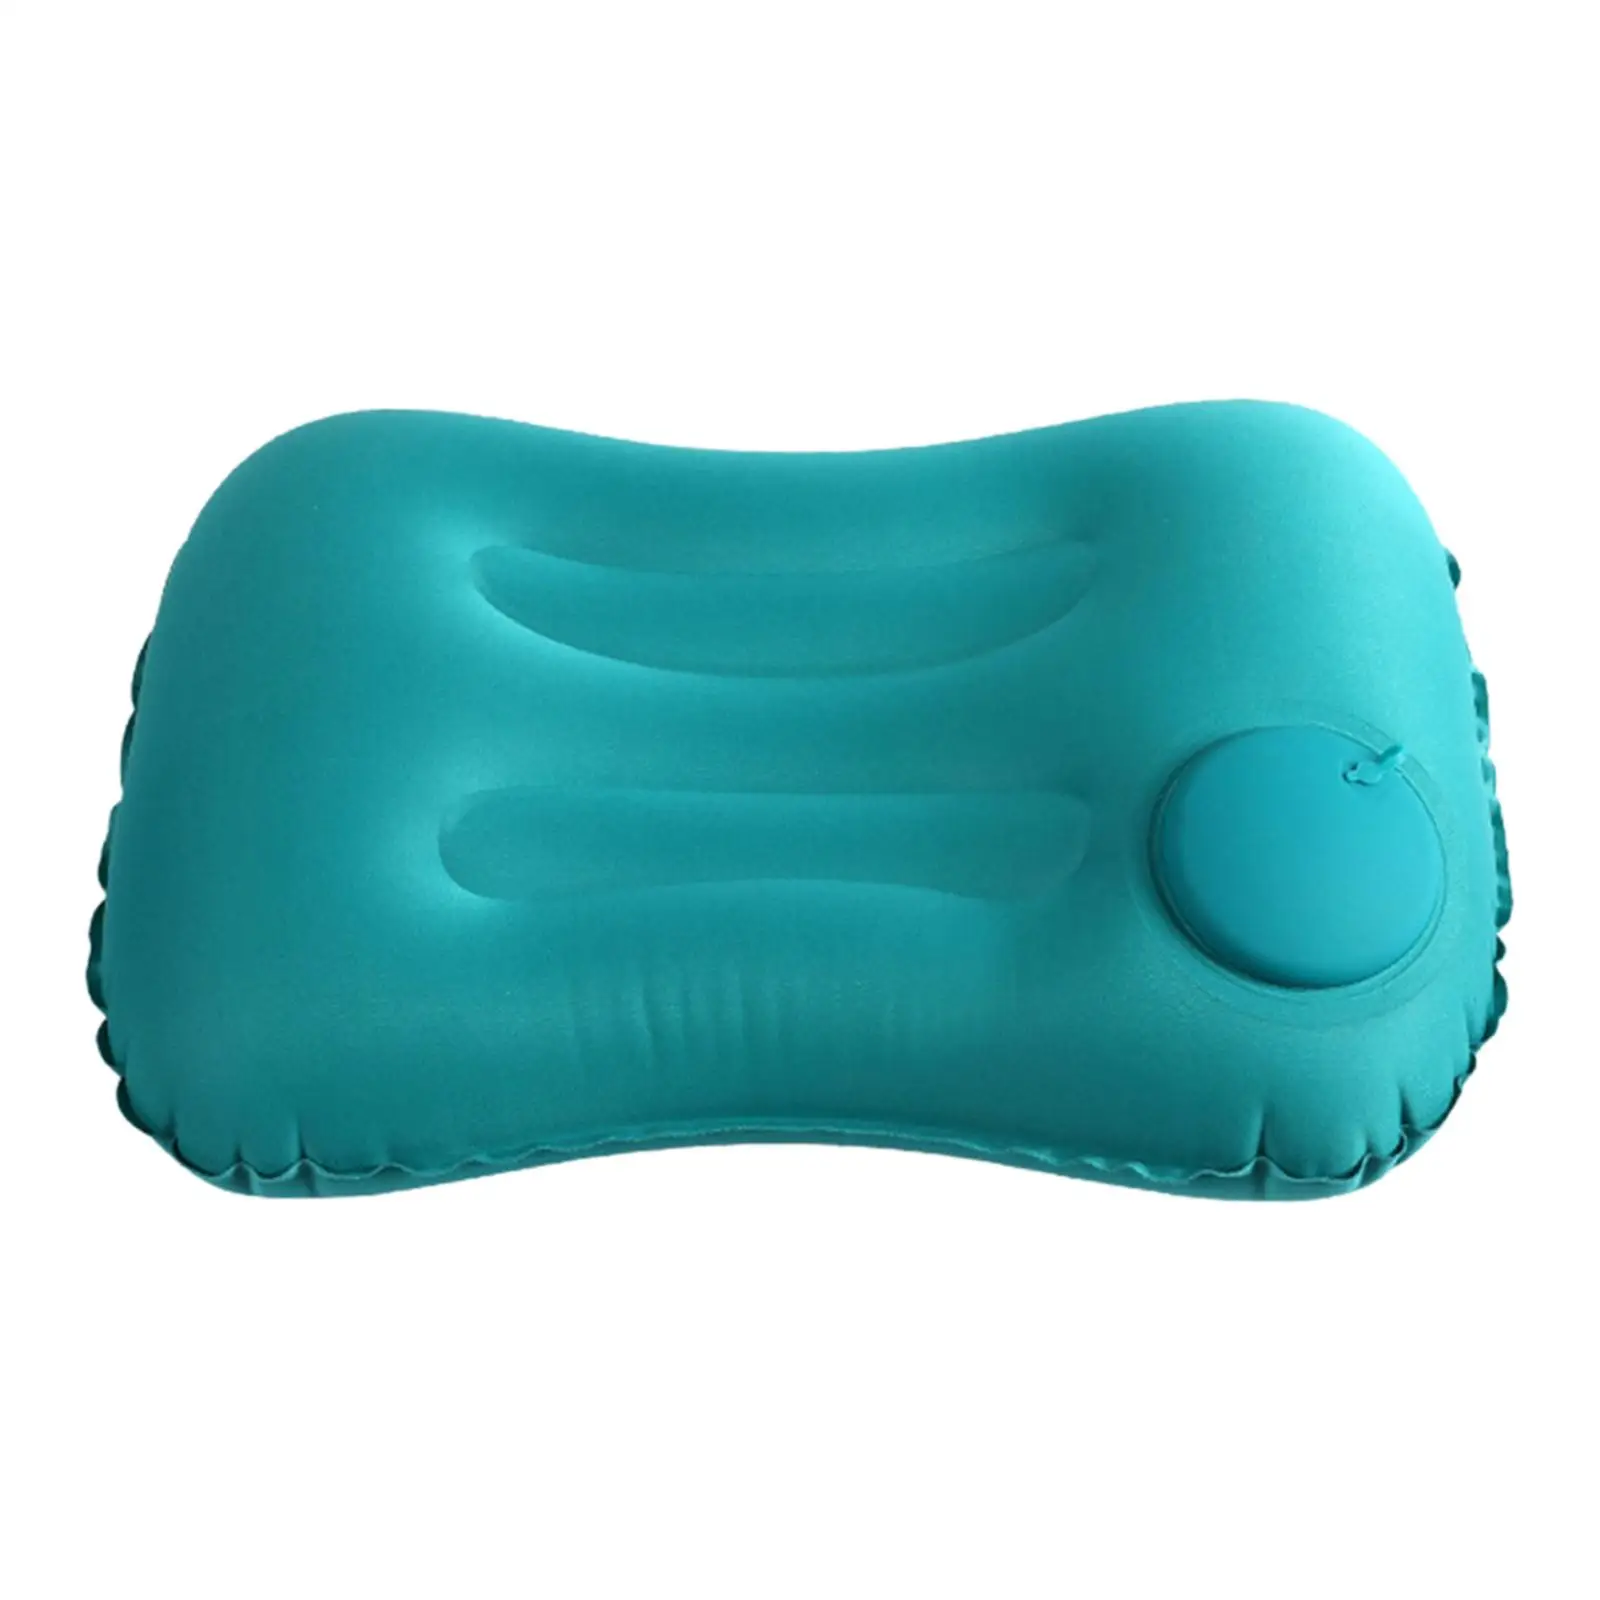 Packable Fabric Air Pillow Compact Back Cushion for Hiking Camping Desk Rest